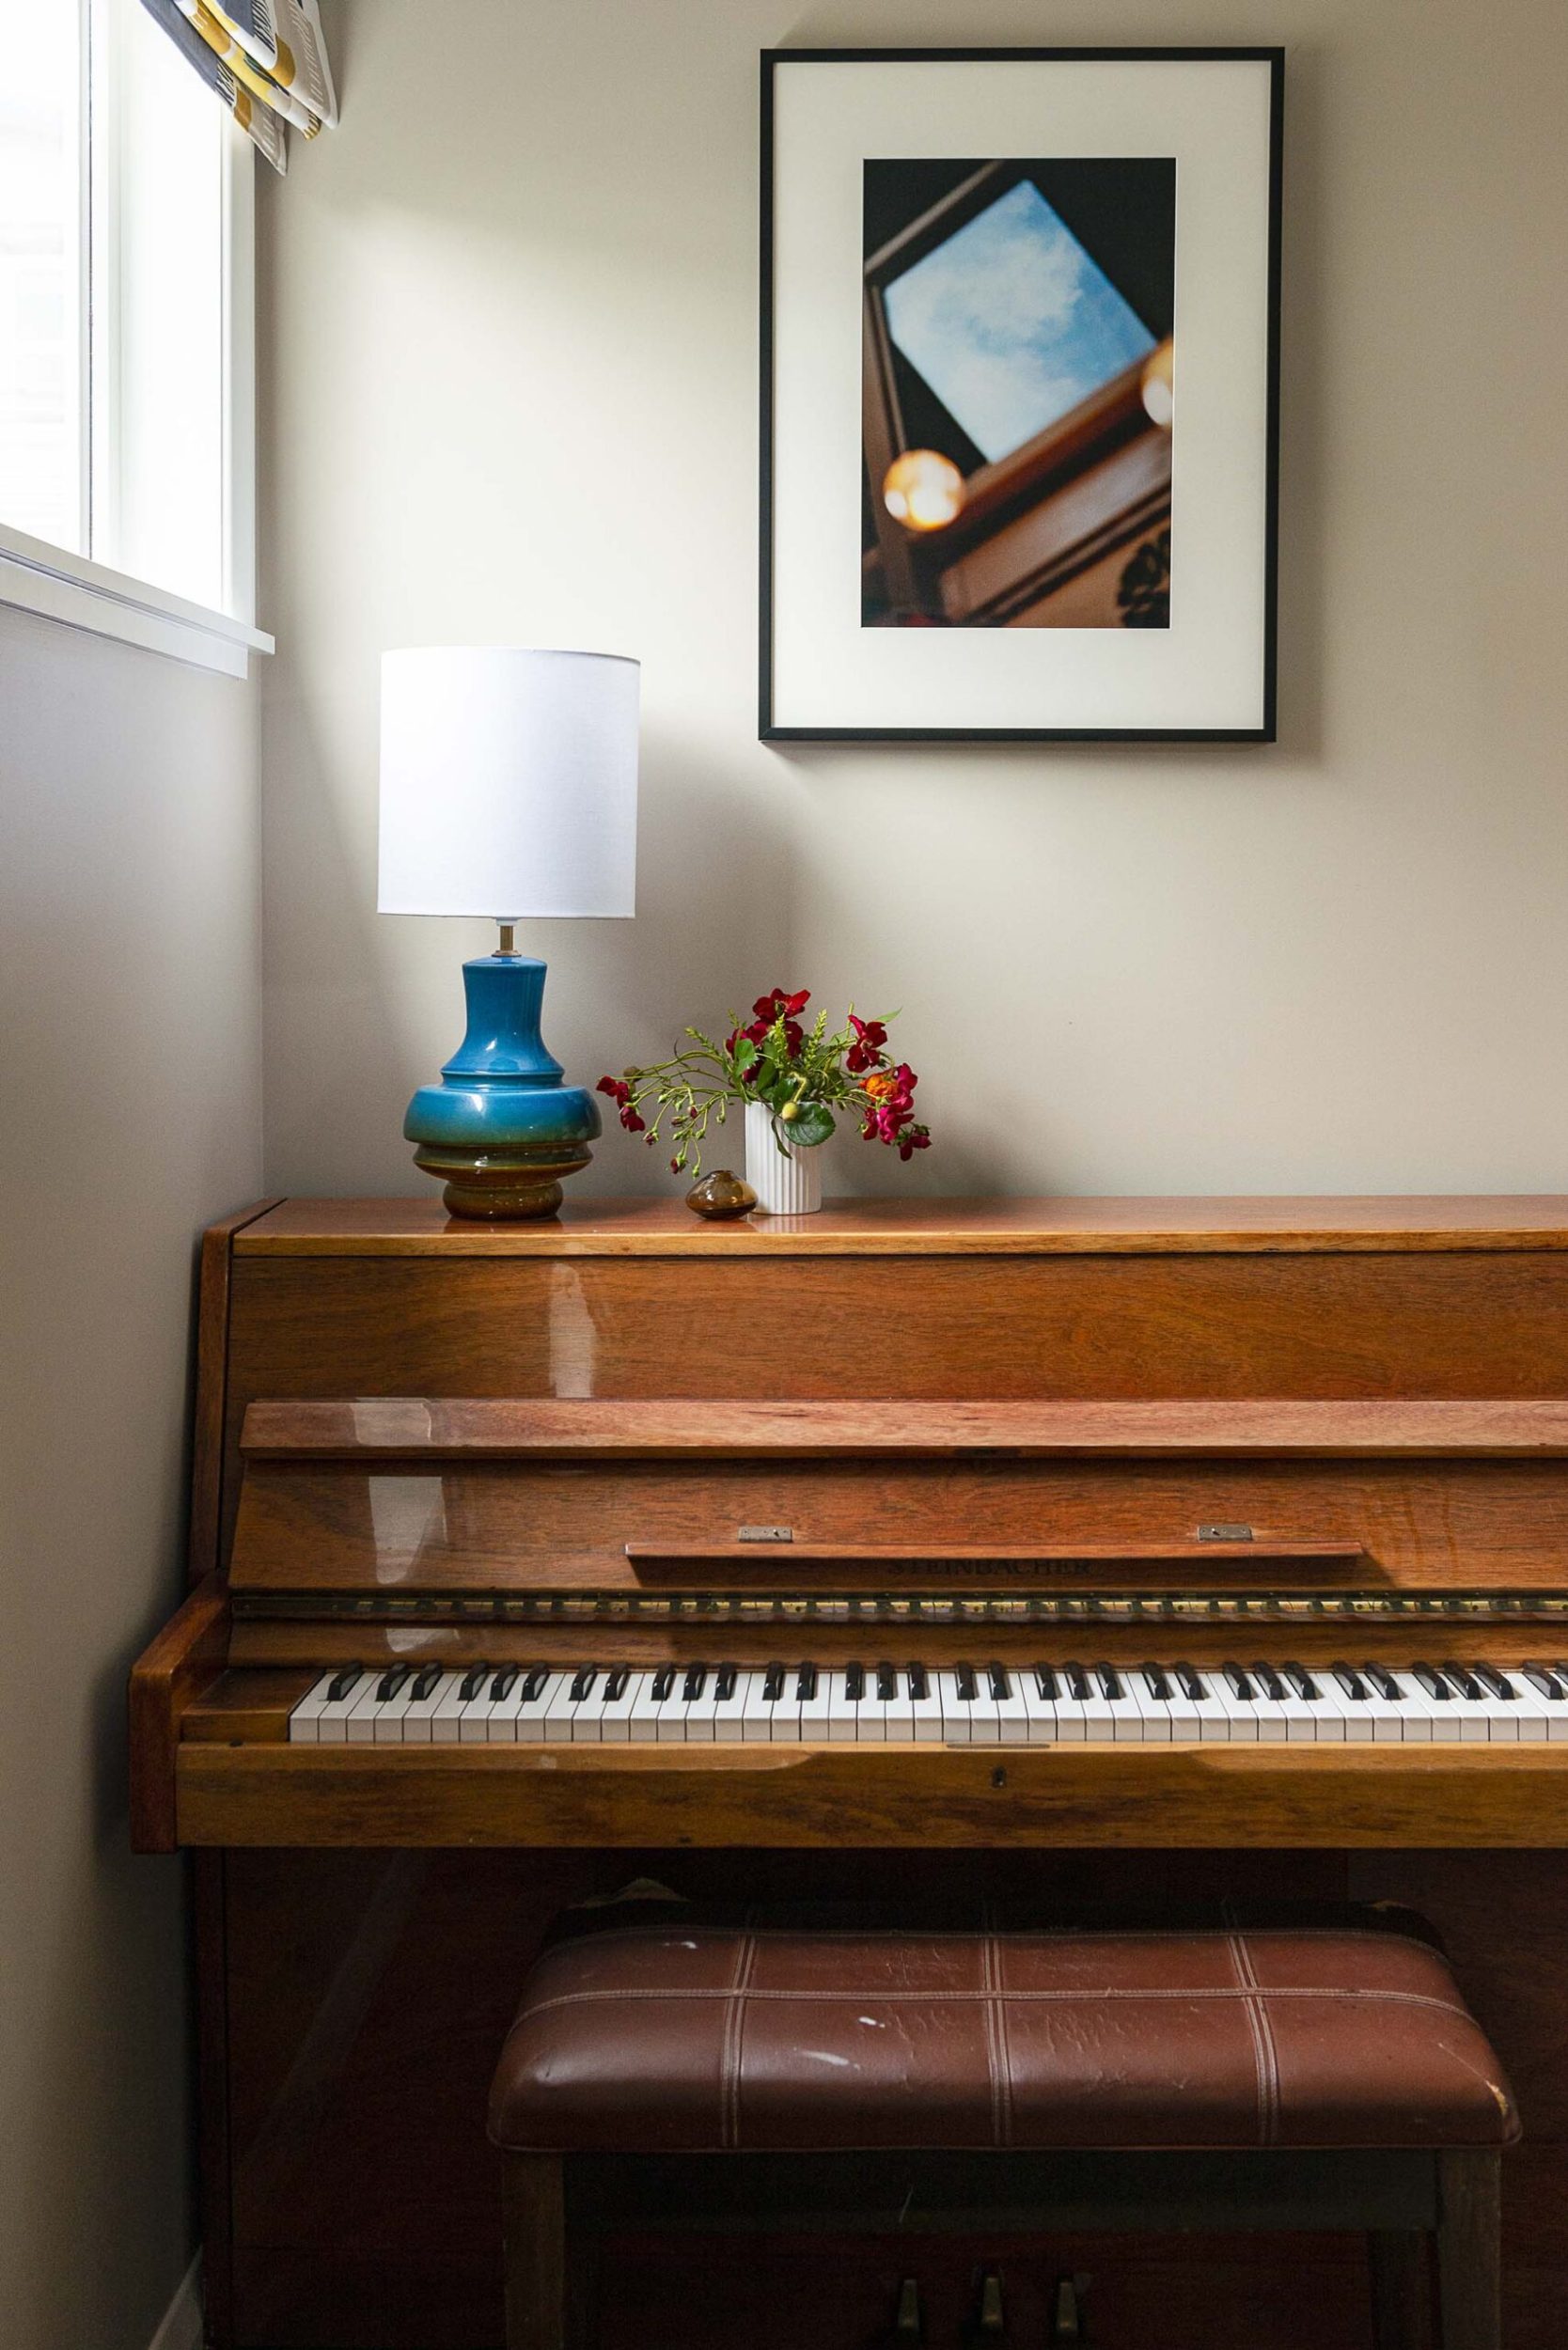 Piano with blue lamp and small white vase with flowers